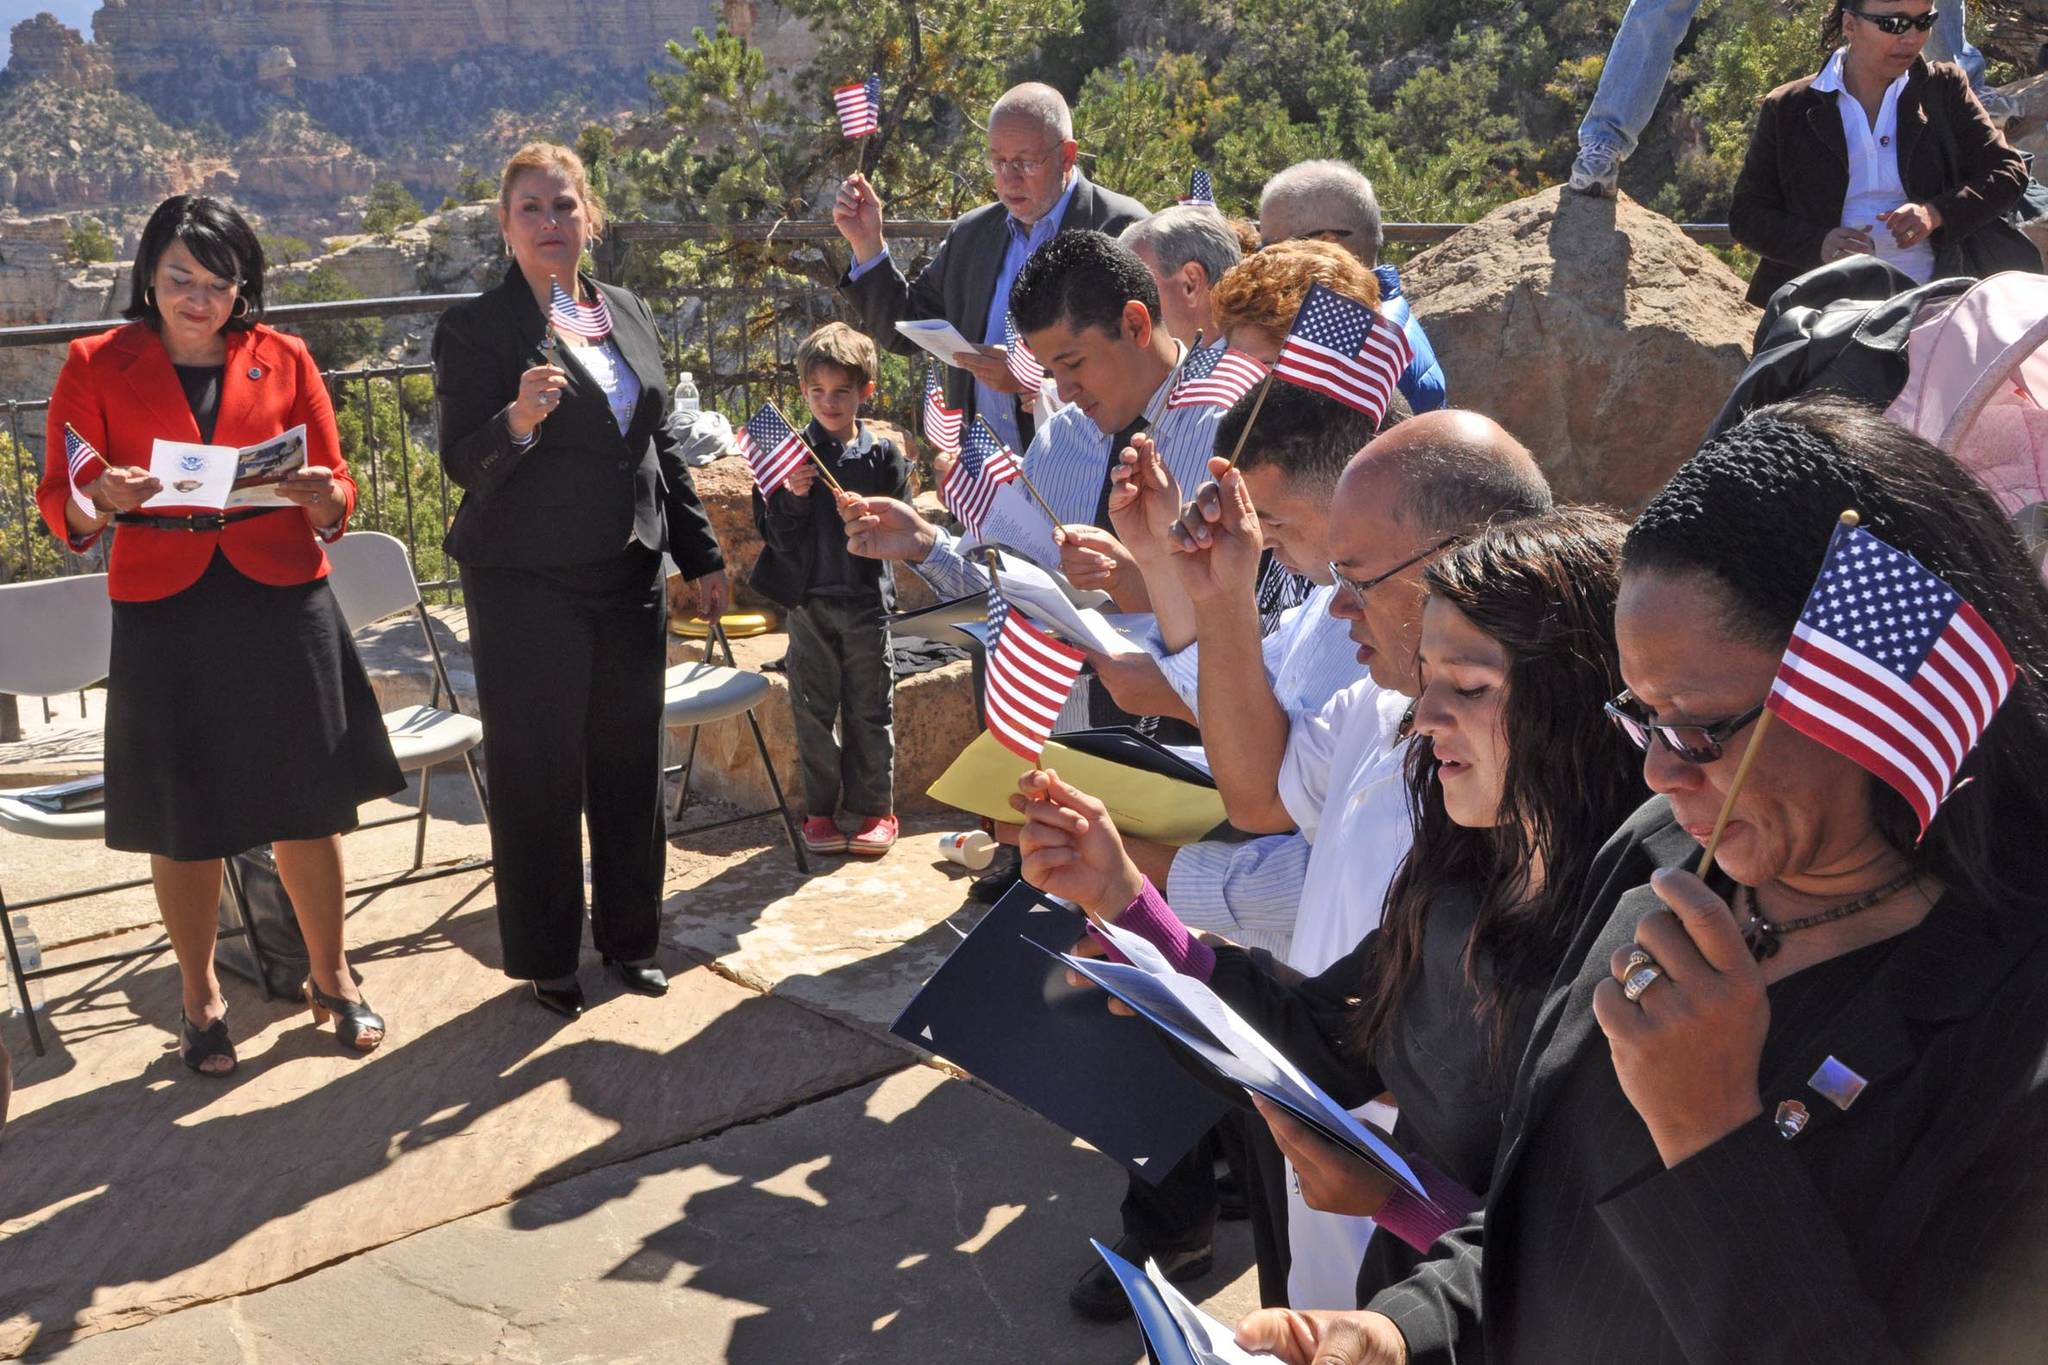 New citizens at a naturalization ceremony at Grand Canyon National Park on Sept. 23, 2010. Flickr/National Park Service photo by Michael Quinn